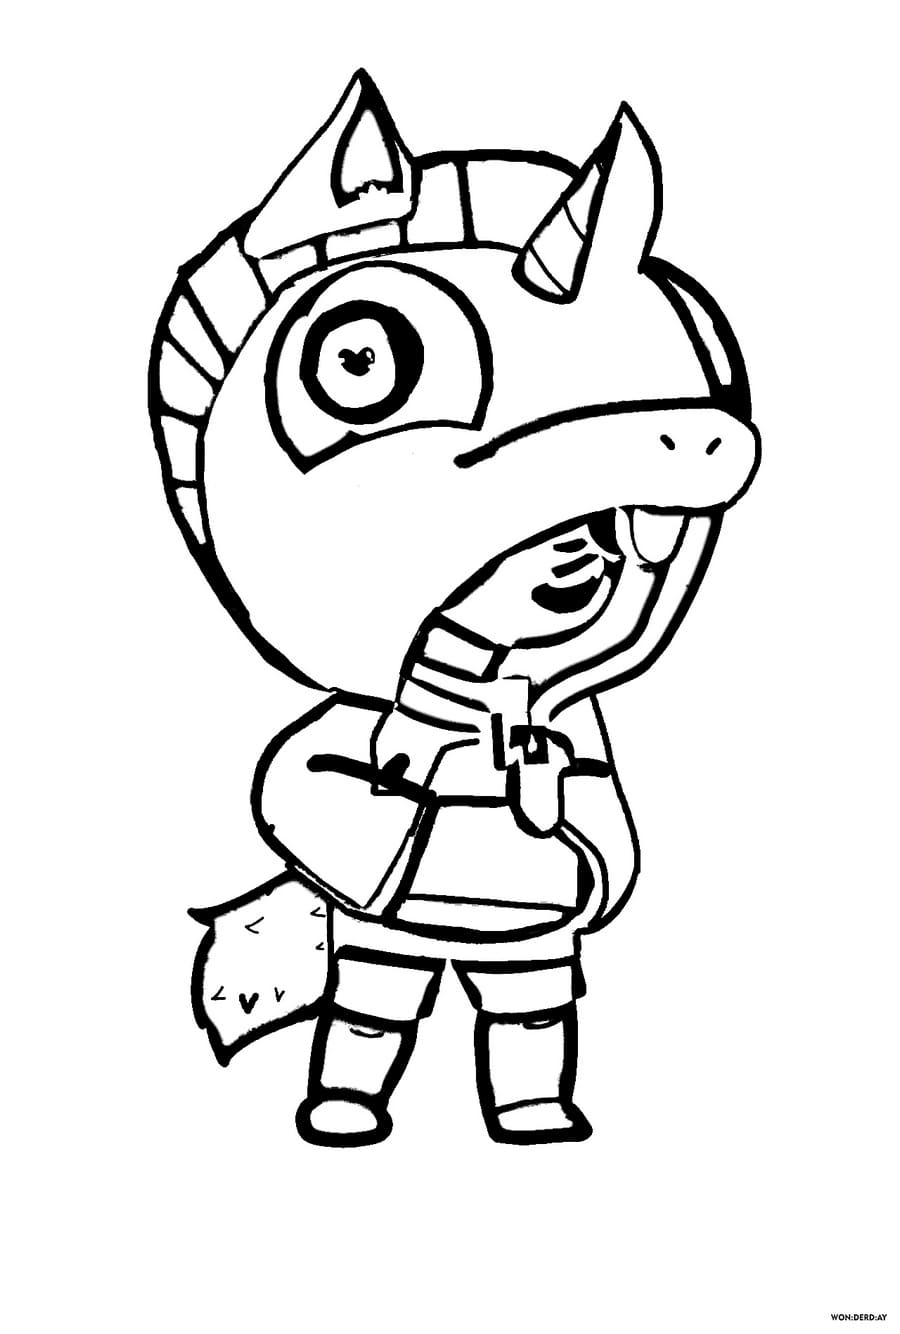 Leon Brawl Stars Coloring Pages Print For Free Wonder Day Coloring Pages For Children And Adults - coloriage brawl stars tara skin